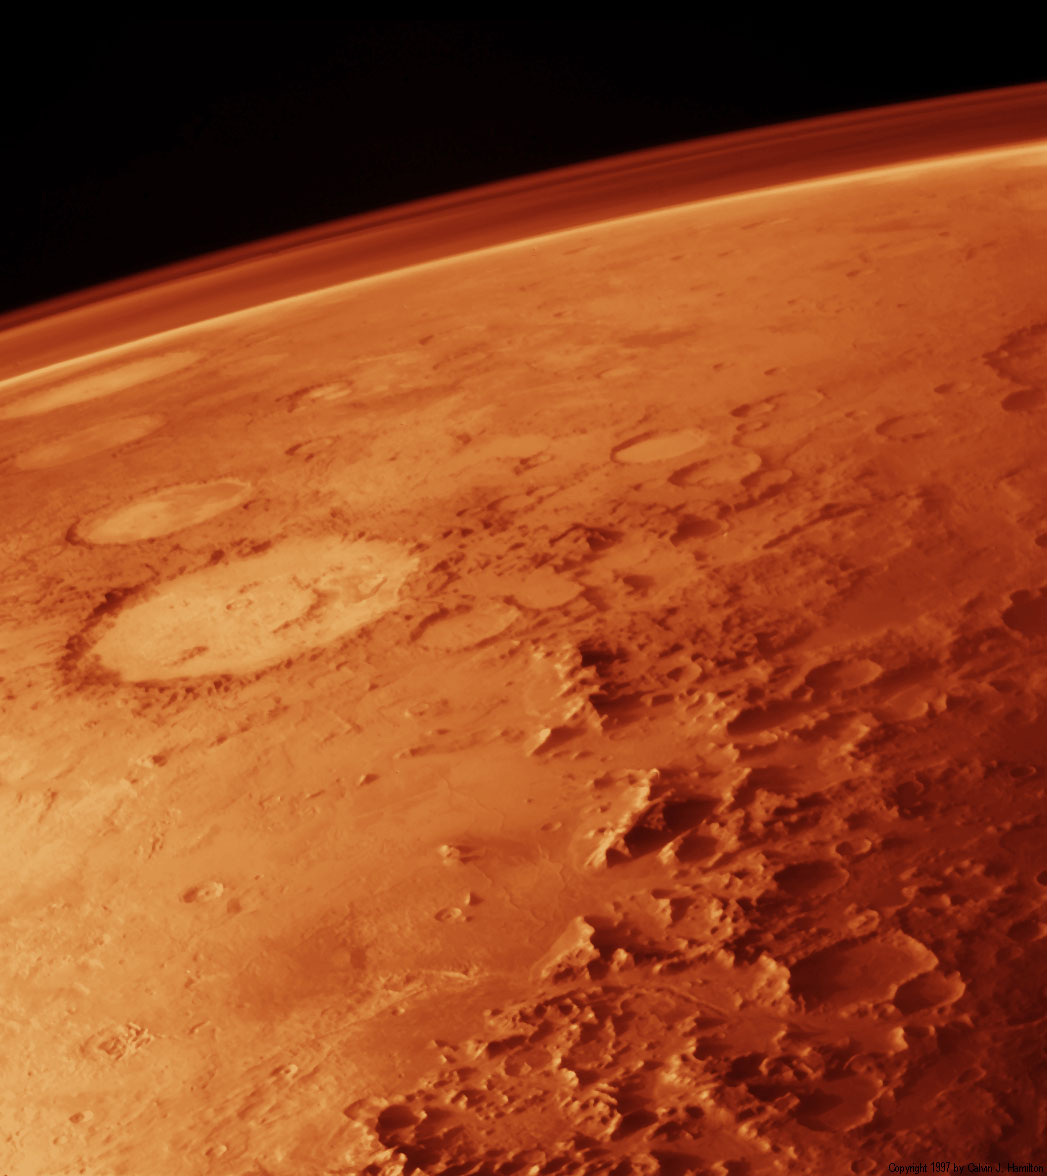 The atmosphere of Mars